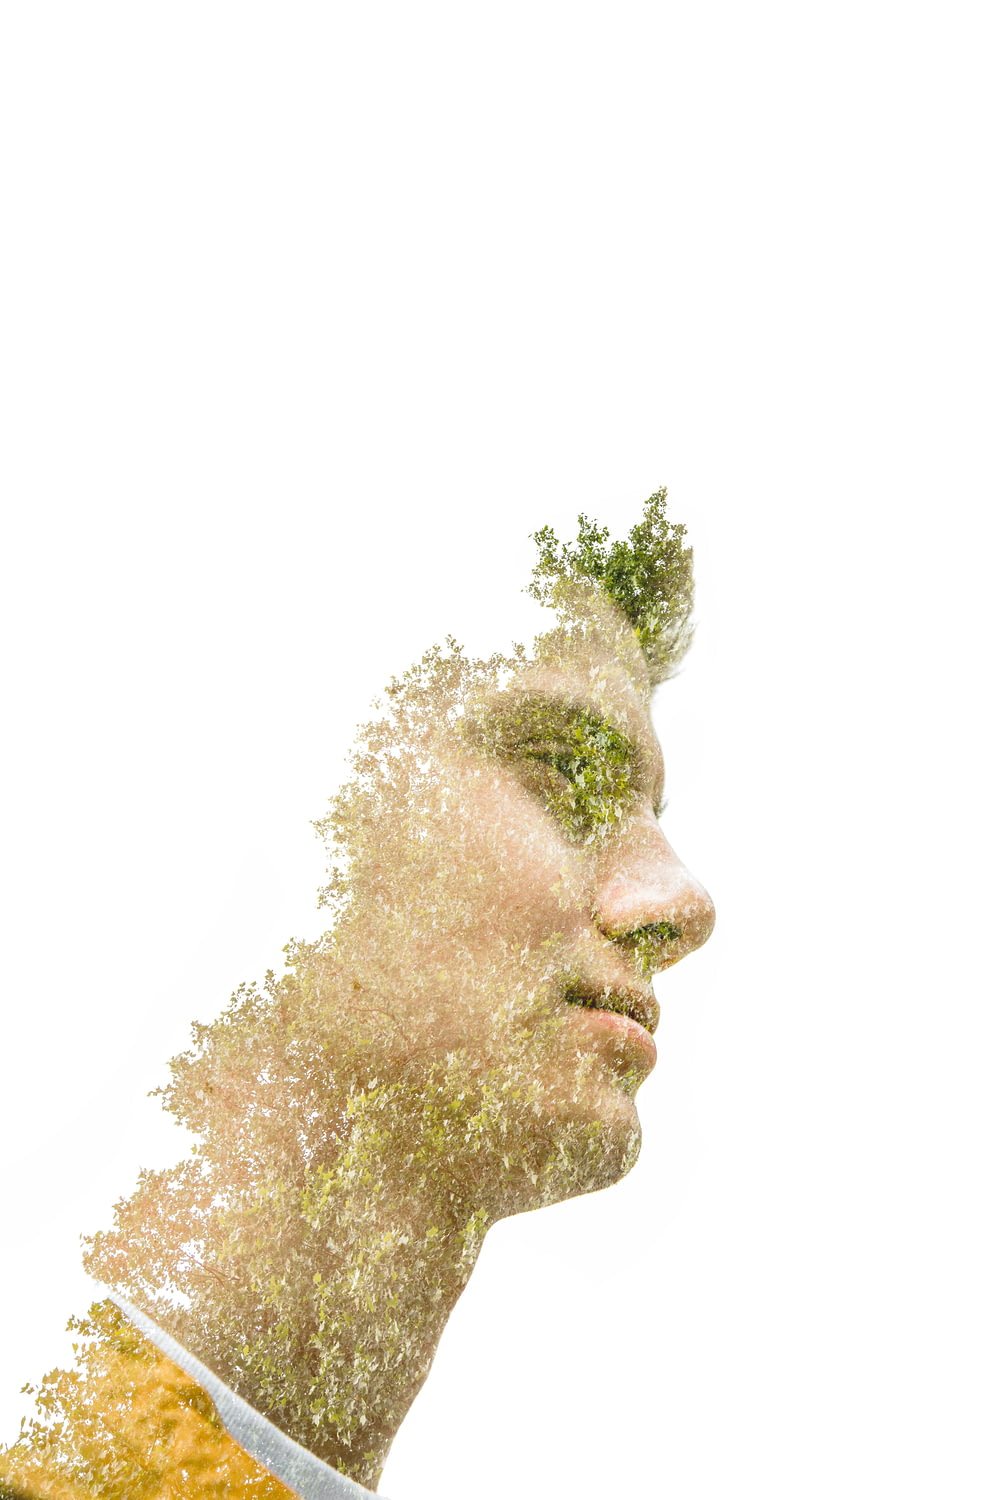 a man's face with trees growing out of it